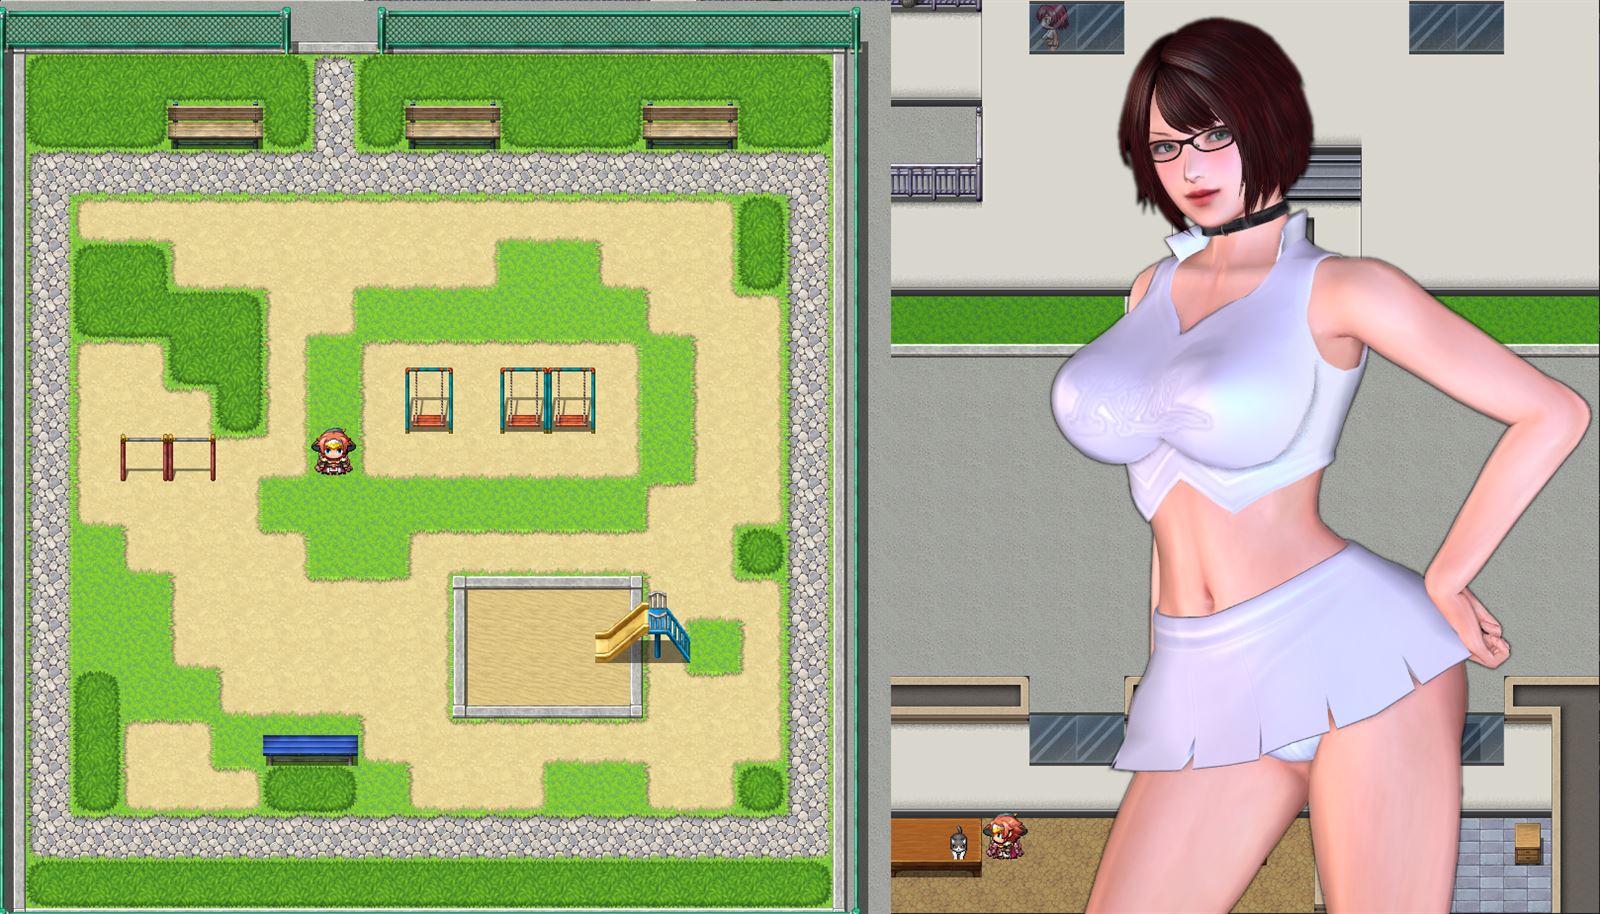 Succulence 2 Live Action Adult Game Screenshots (2) .